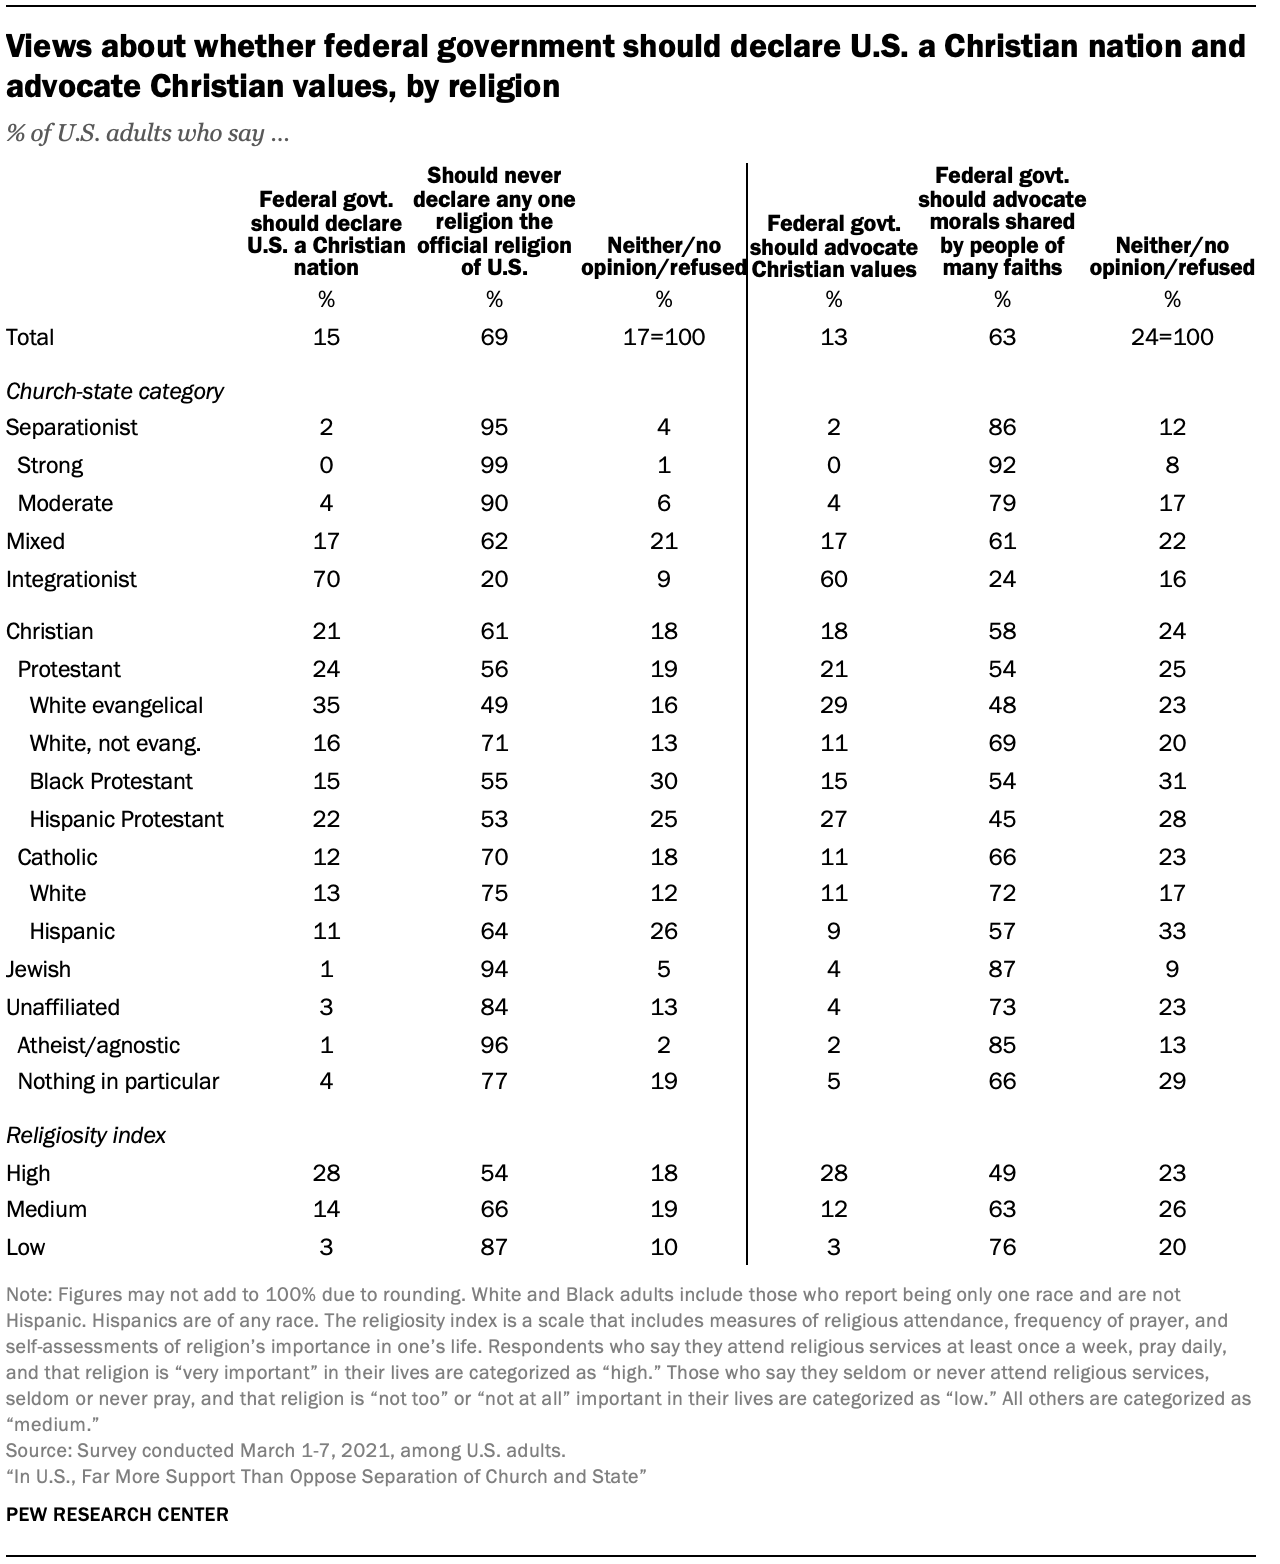 Views about separation of church and state and whether Constitution was divinely inspired, among demographic groups